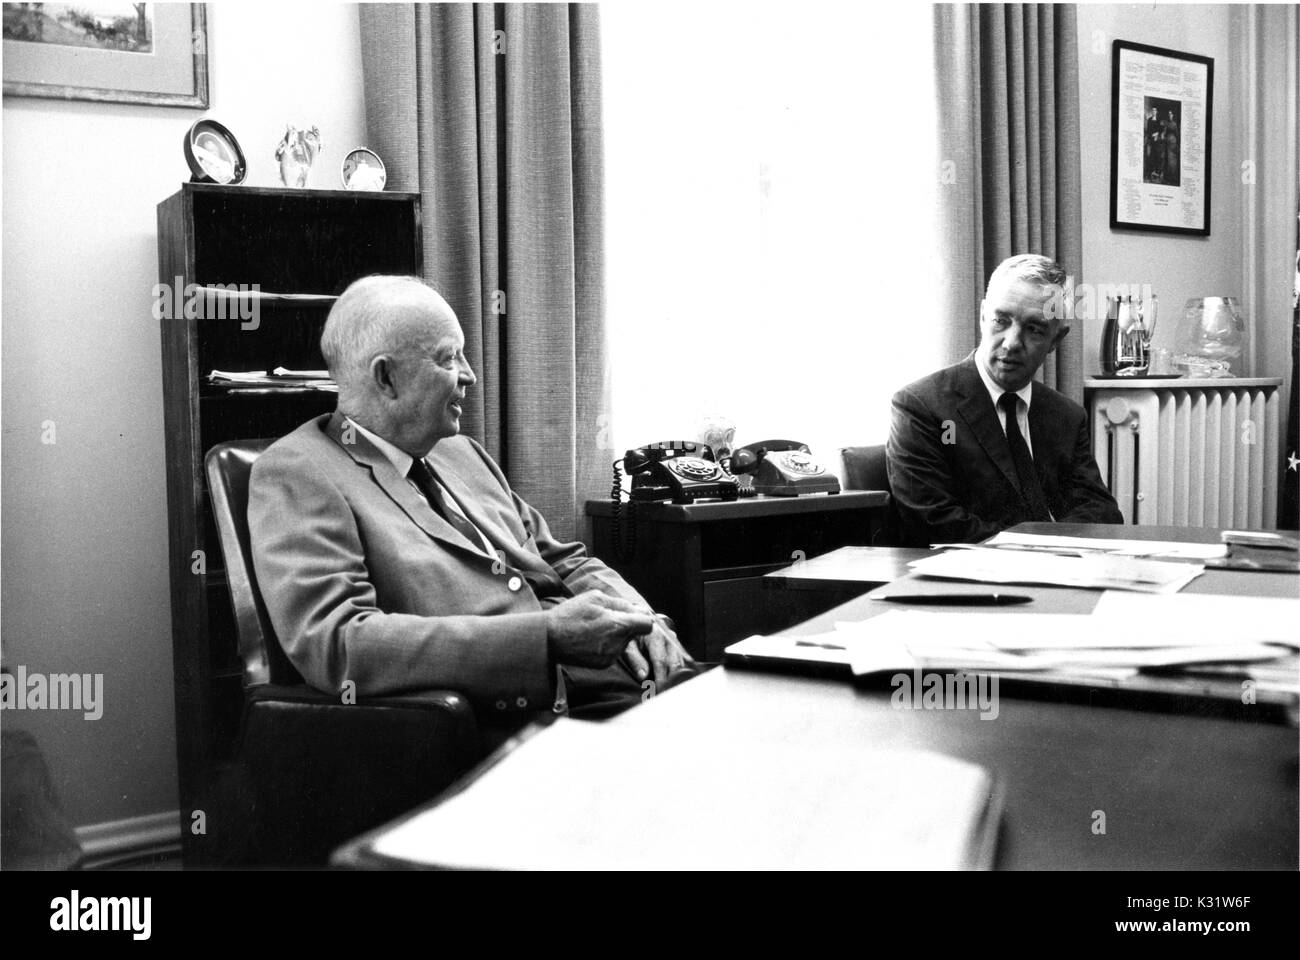 Former President of the United States Dwight David Eisenhower (left) speaking to professor of business history at Johns Hopkins University Alfred DuPont Chandler (right), United States, 1968. Stock Photo